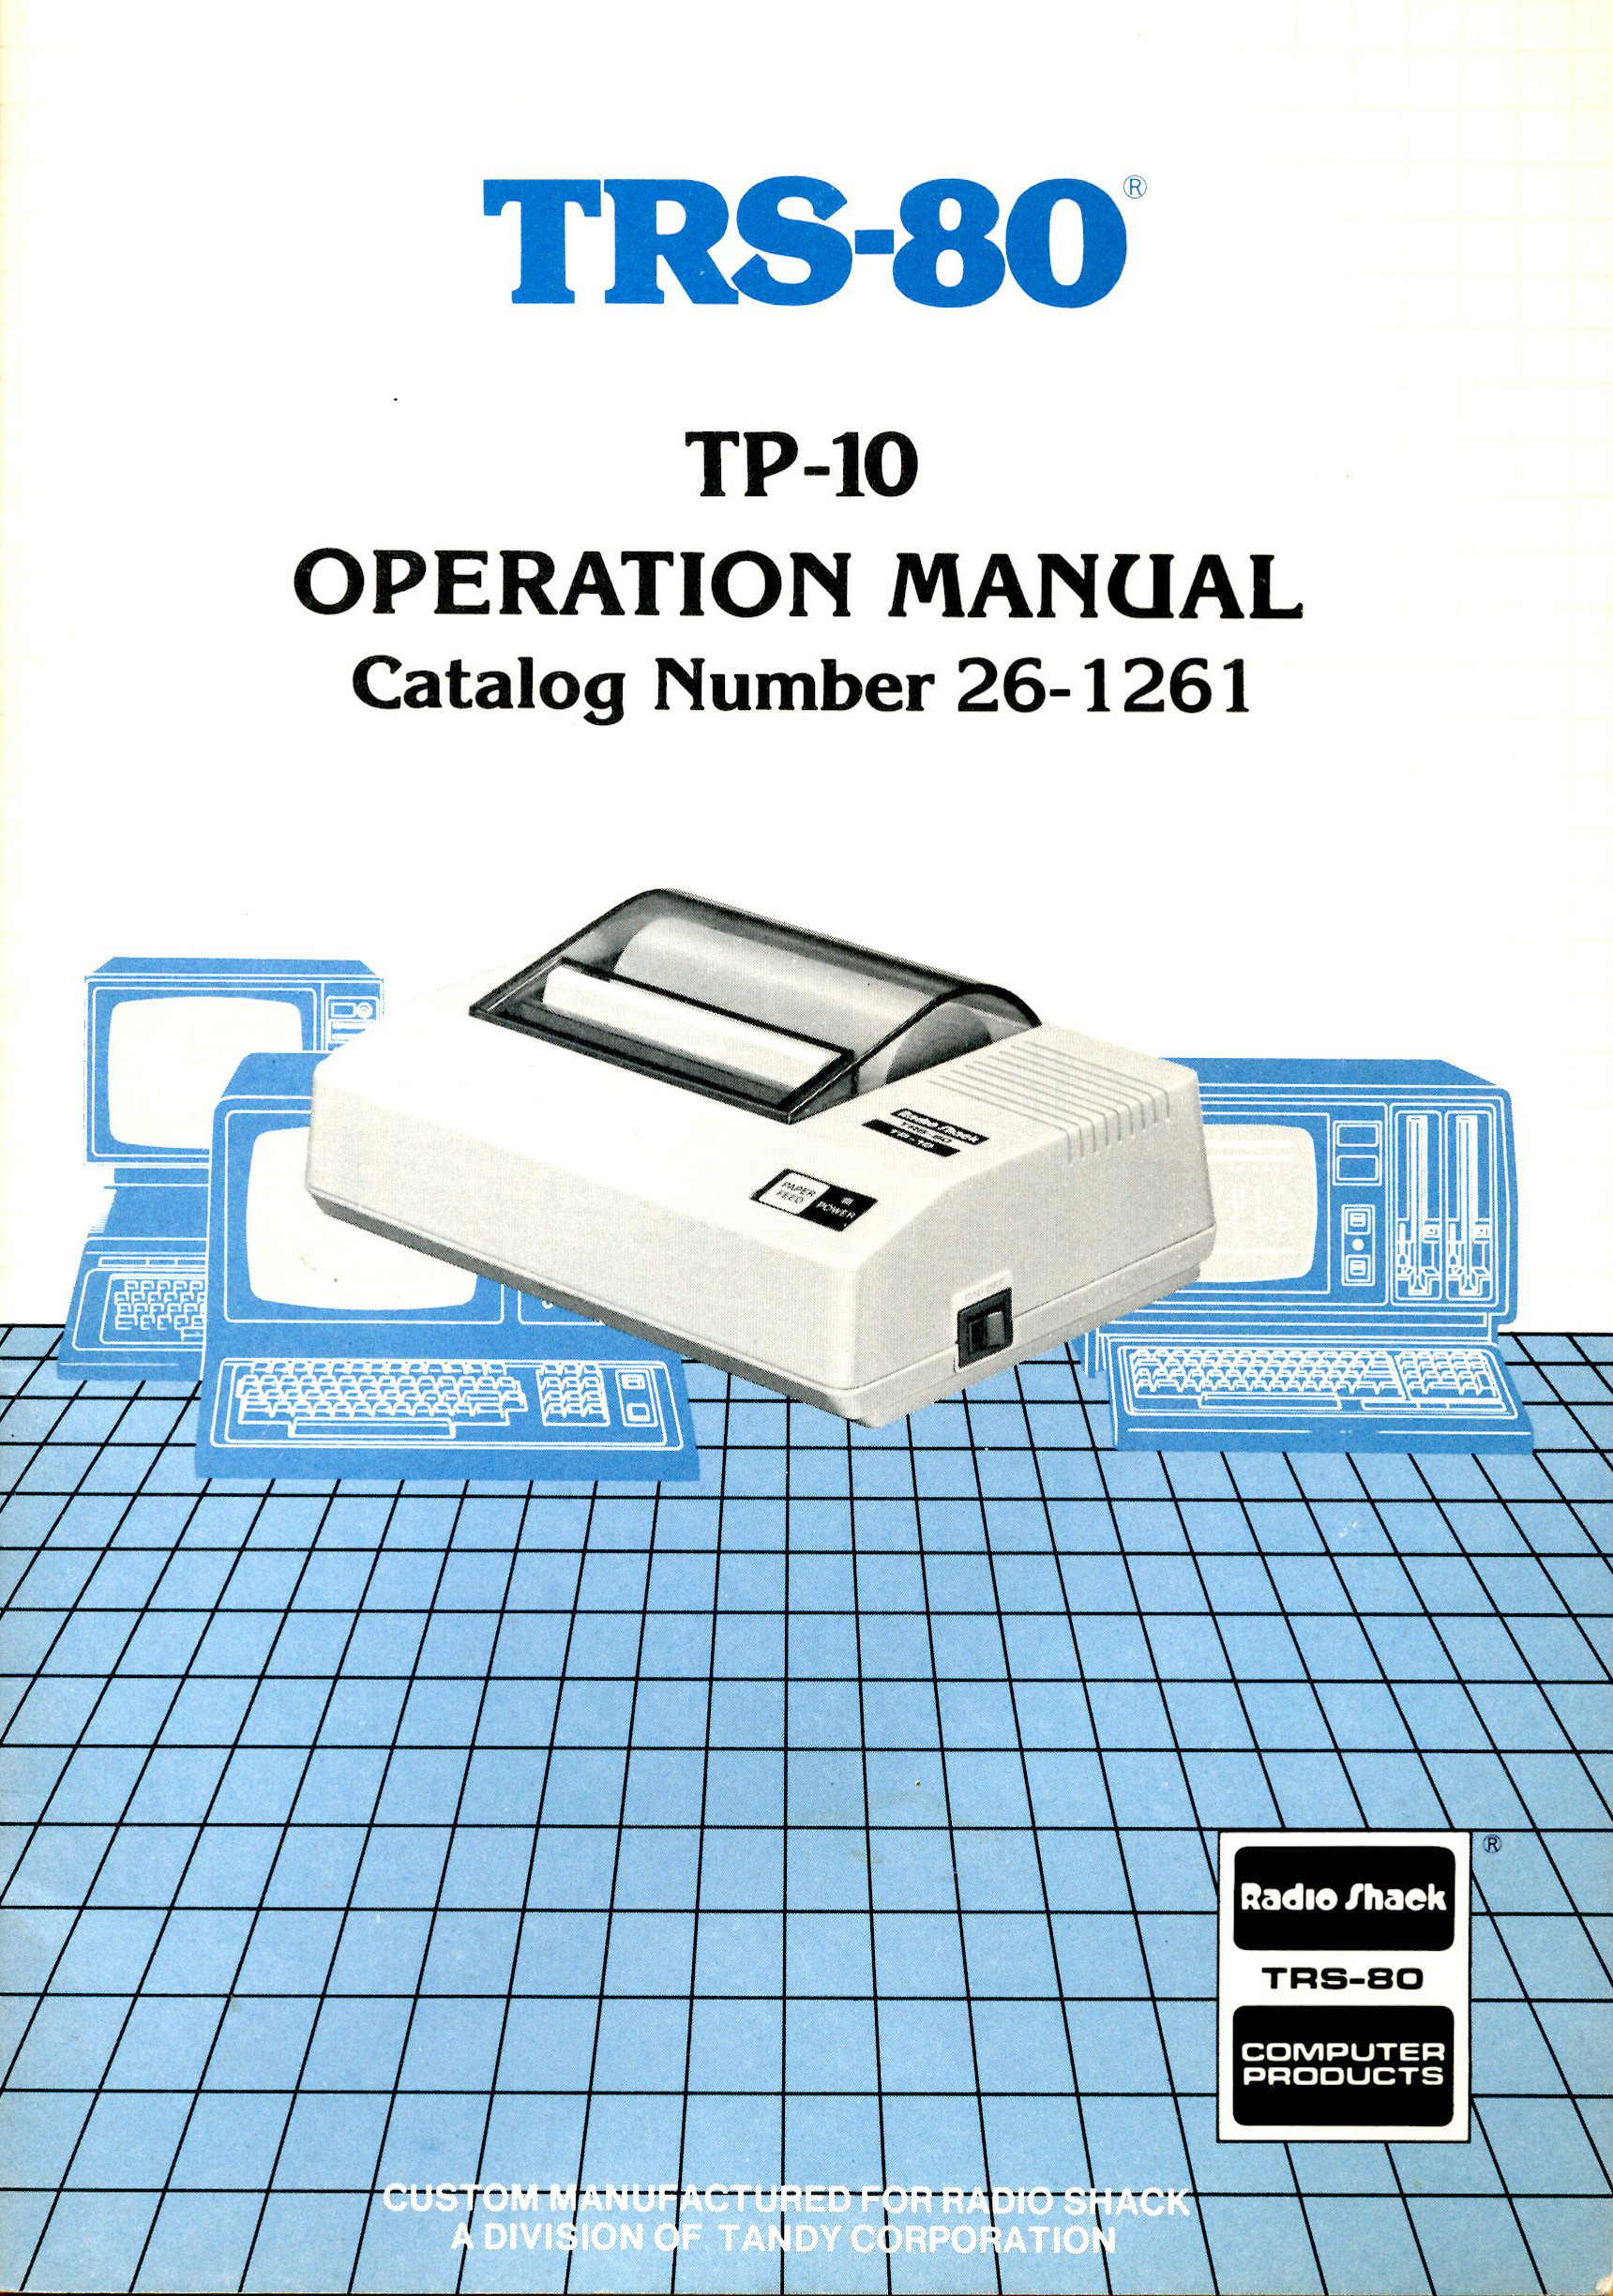 TRS-80 Operational Manual Cat 26-1261 paperback - Tandy